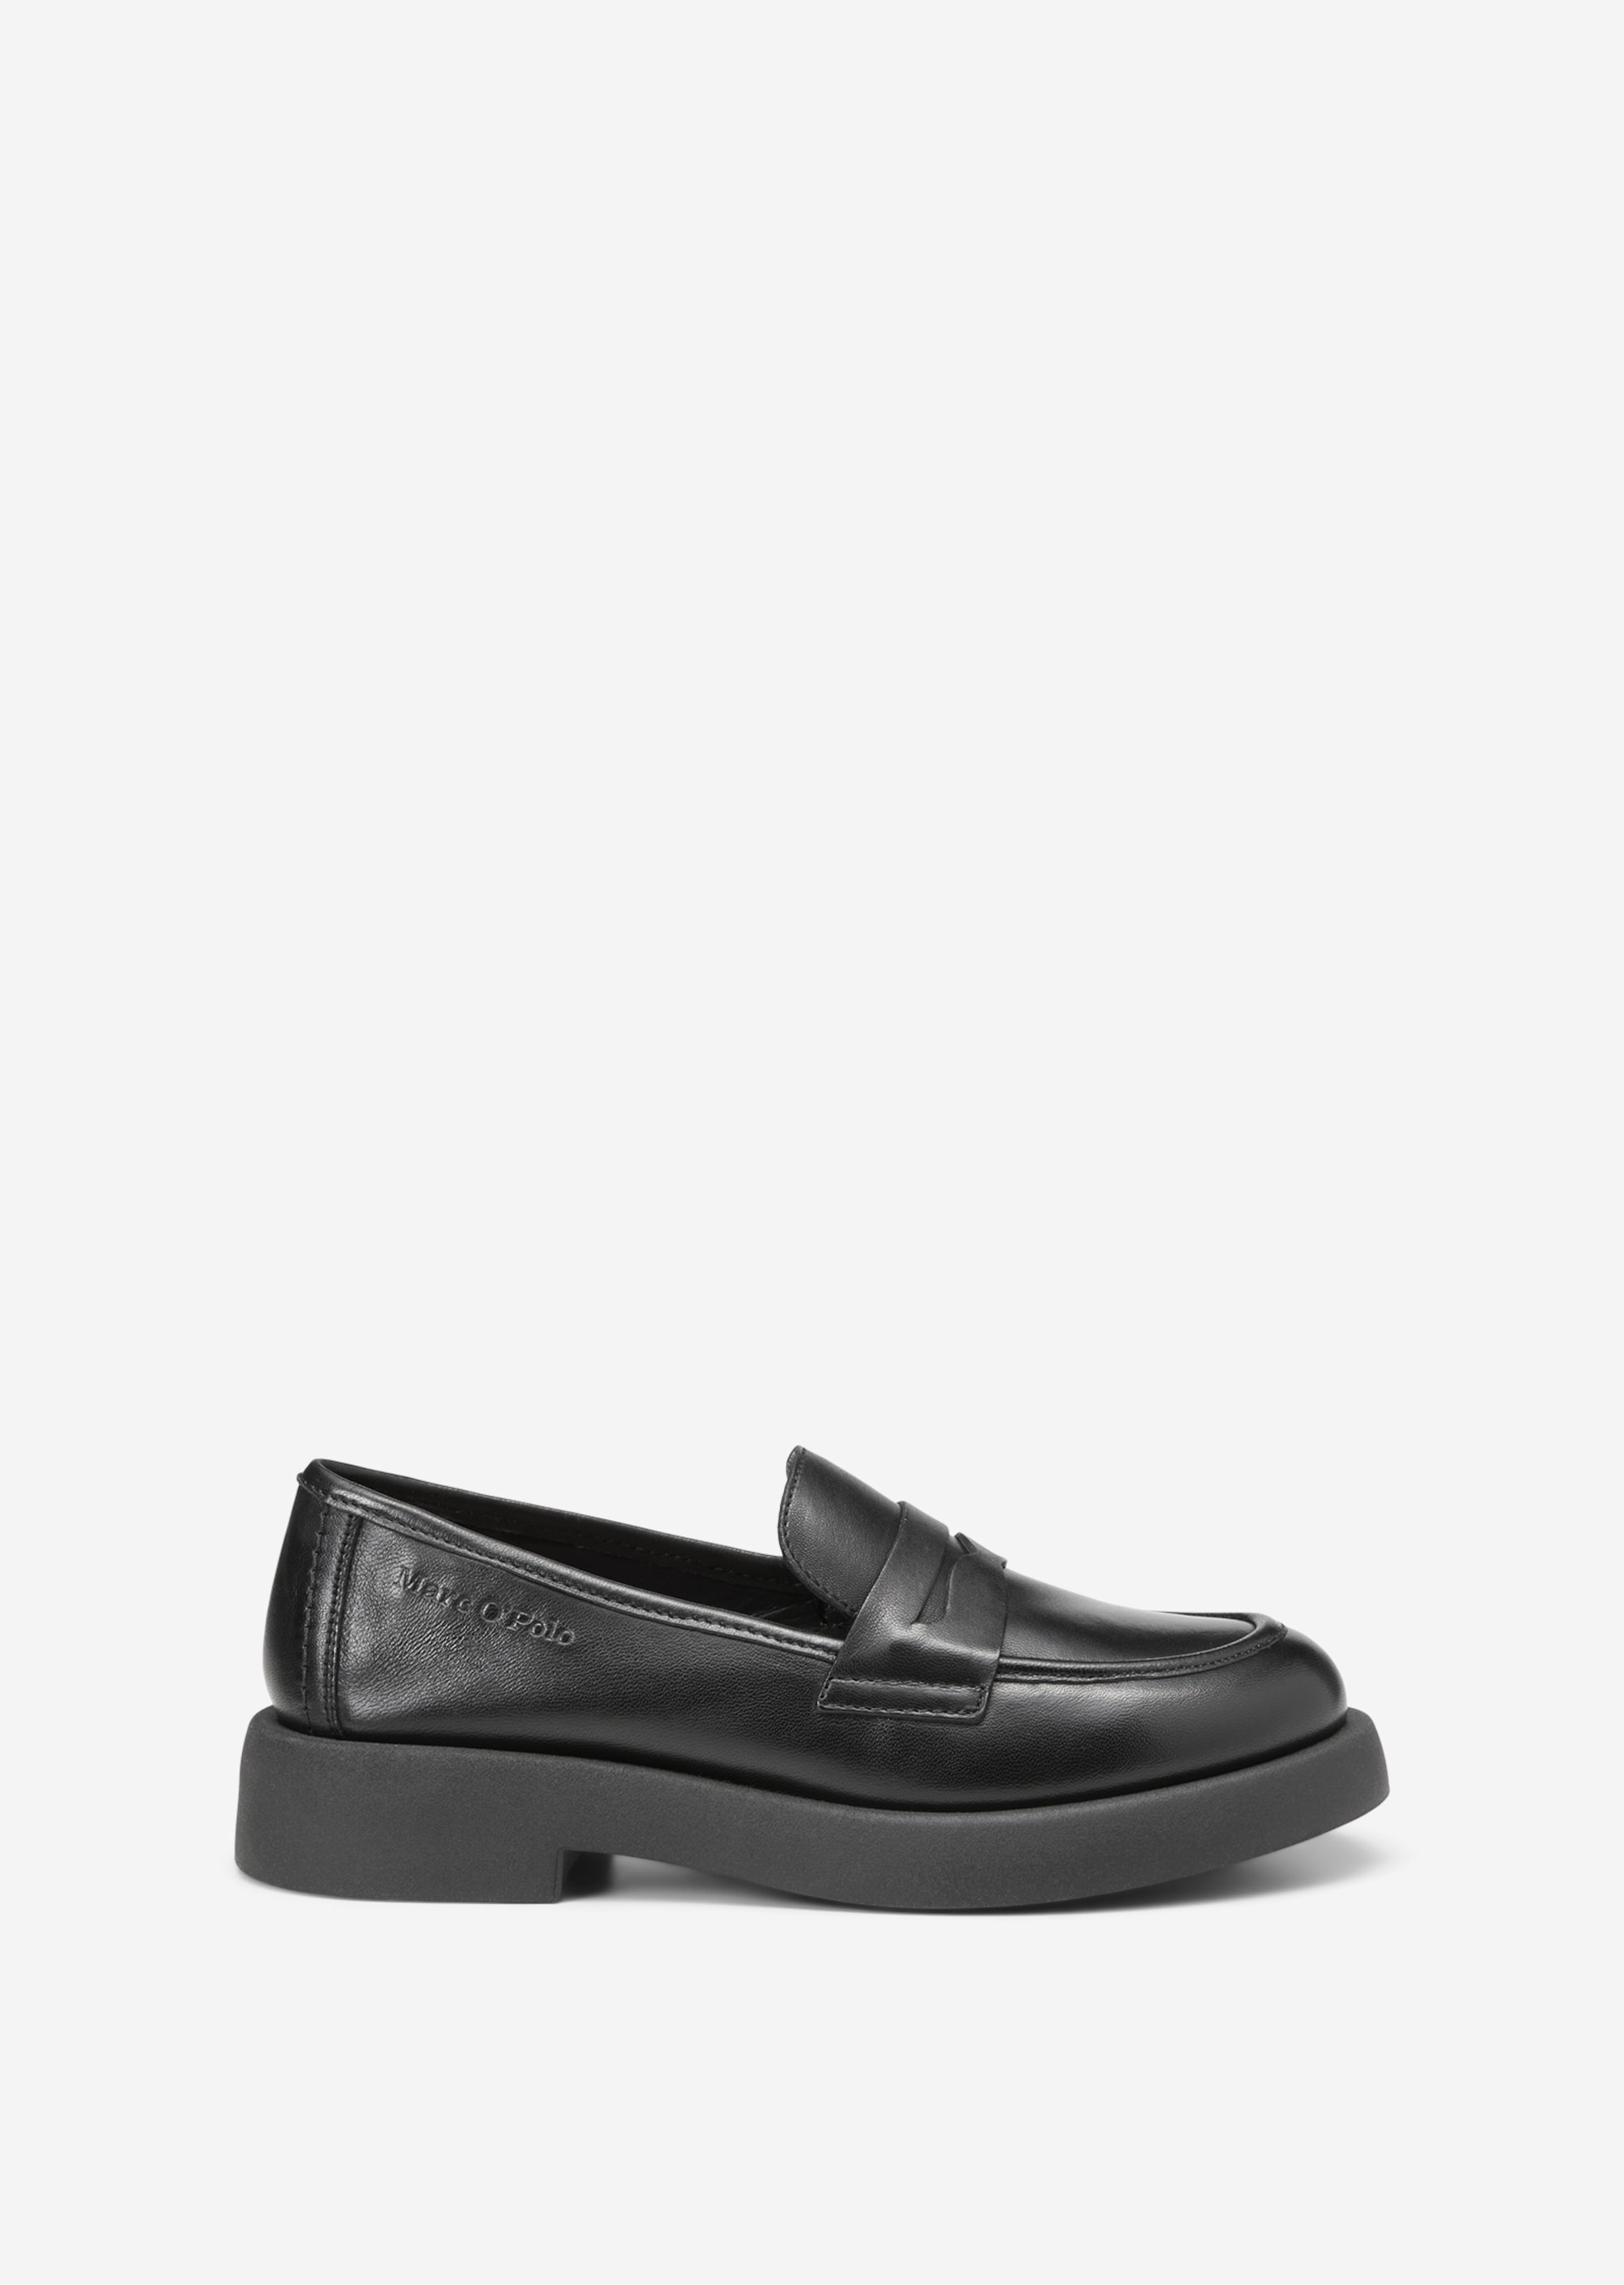 Penny loafers made of soft calfskin - black | Loafers | MARC O’POLO